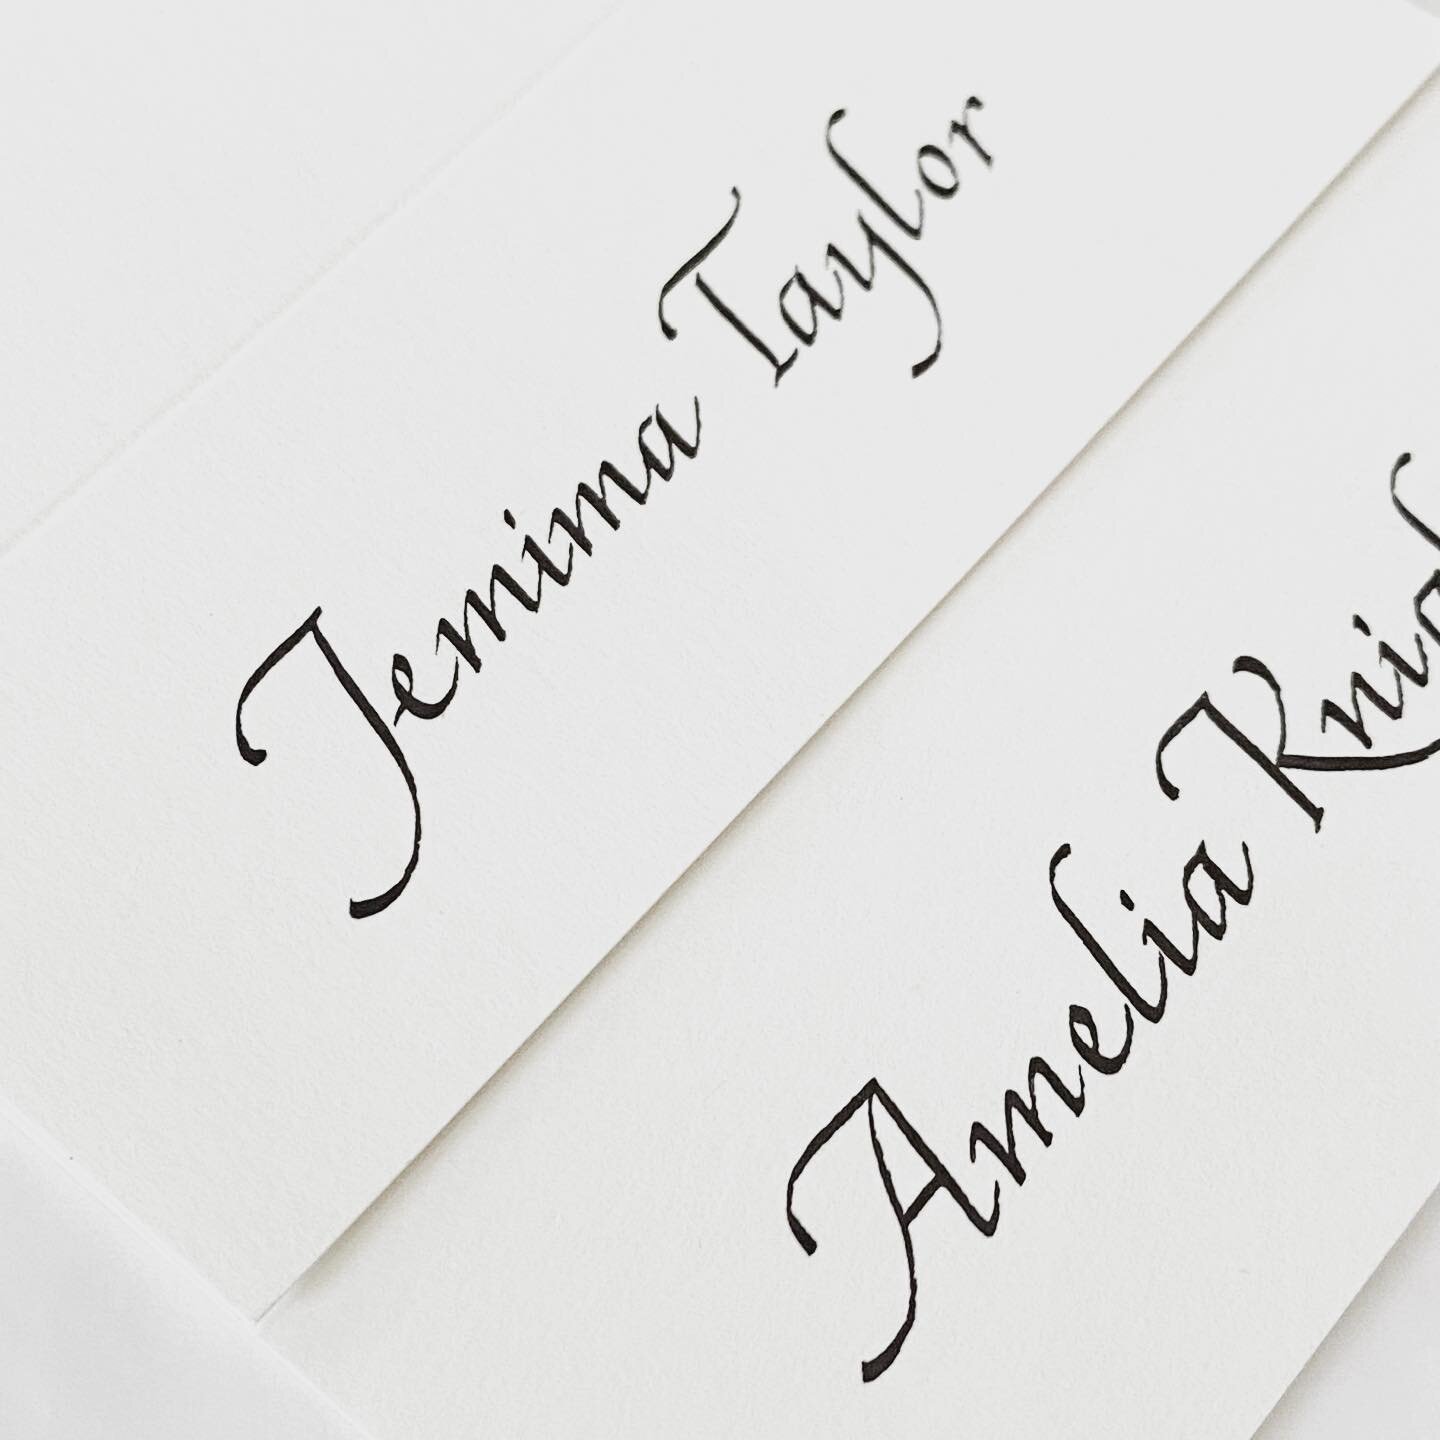 Let&rsquo;s see what this year will bring. For now events are on, even if with fewer guests! 

Placecards in italic. Italic was the first script I learned way back when I tried myself in calligraphy. I still really enjoy the accuracy and neatness of 